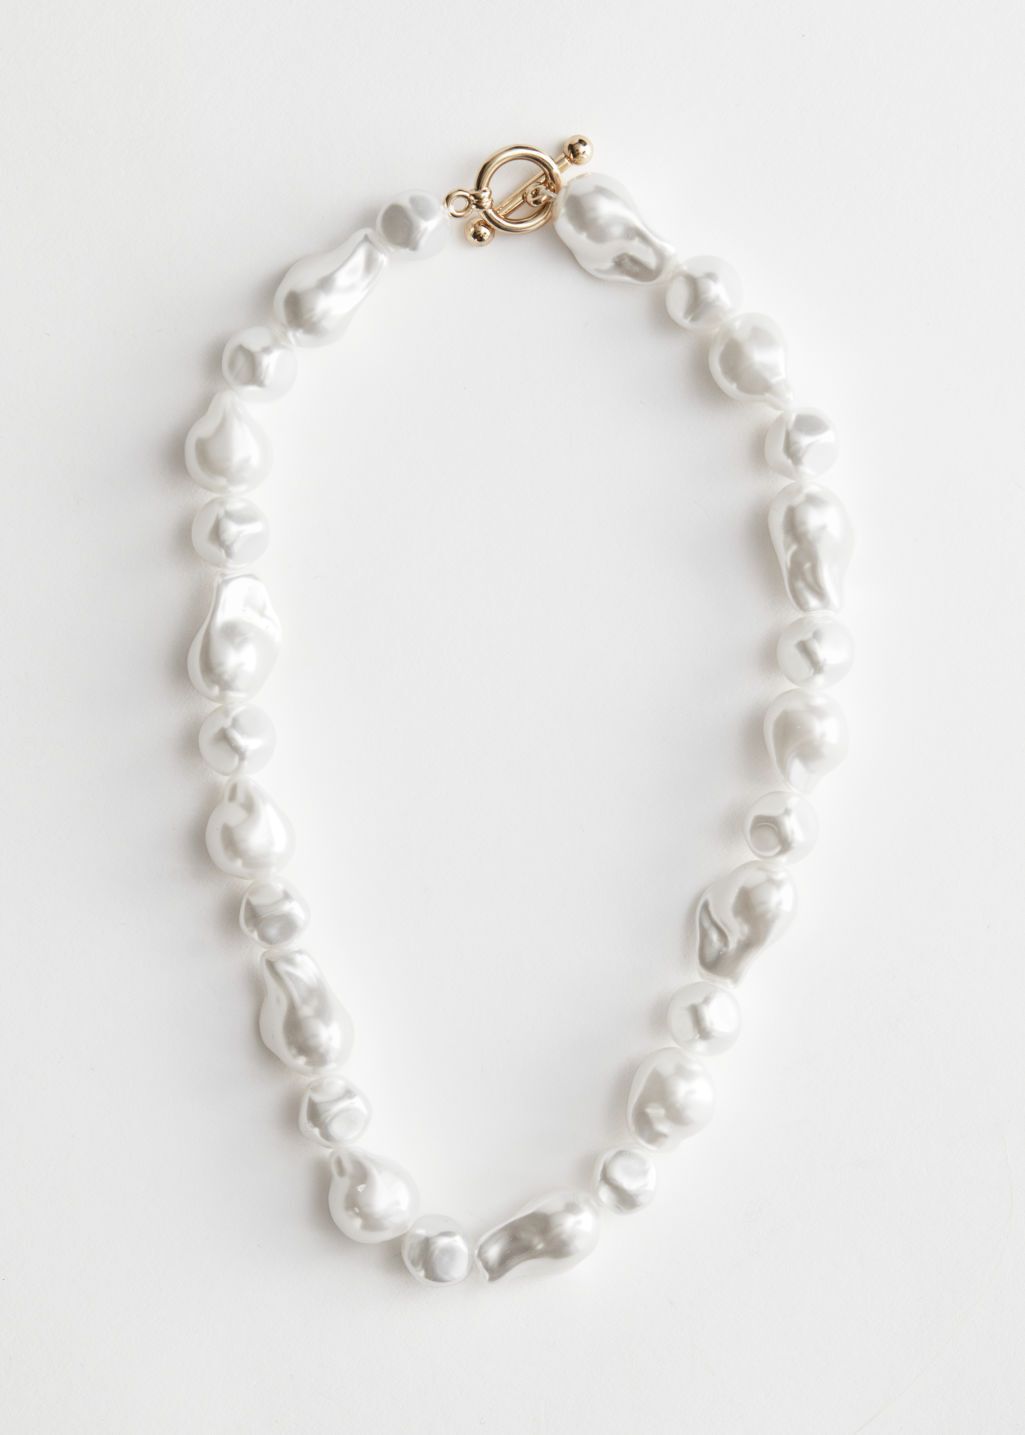 Organic Pearl Bead Necklace